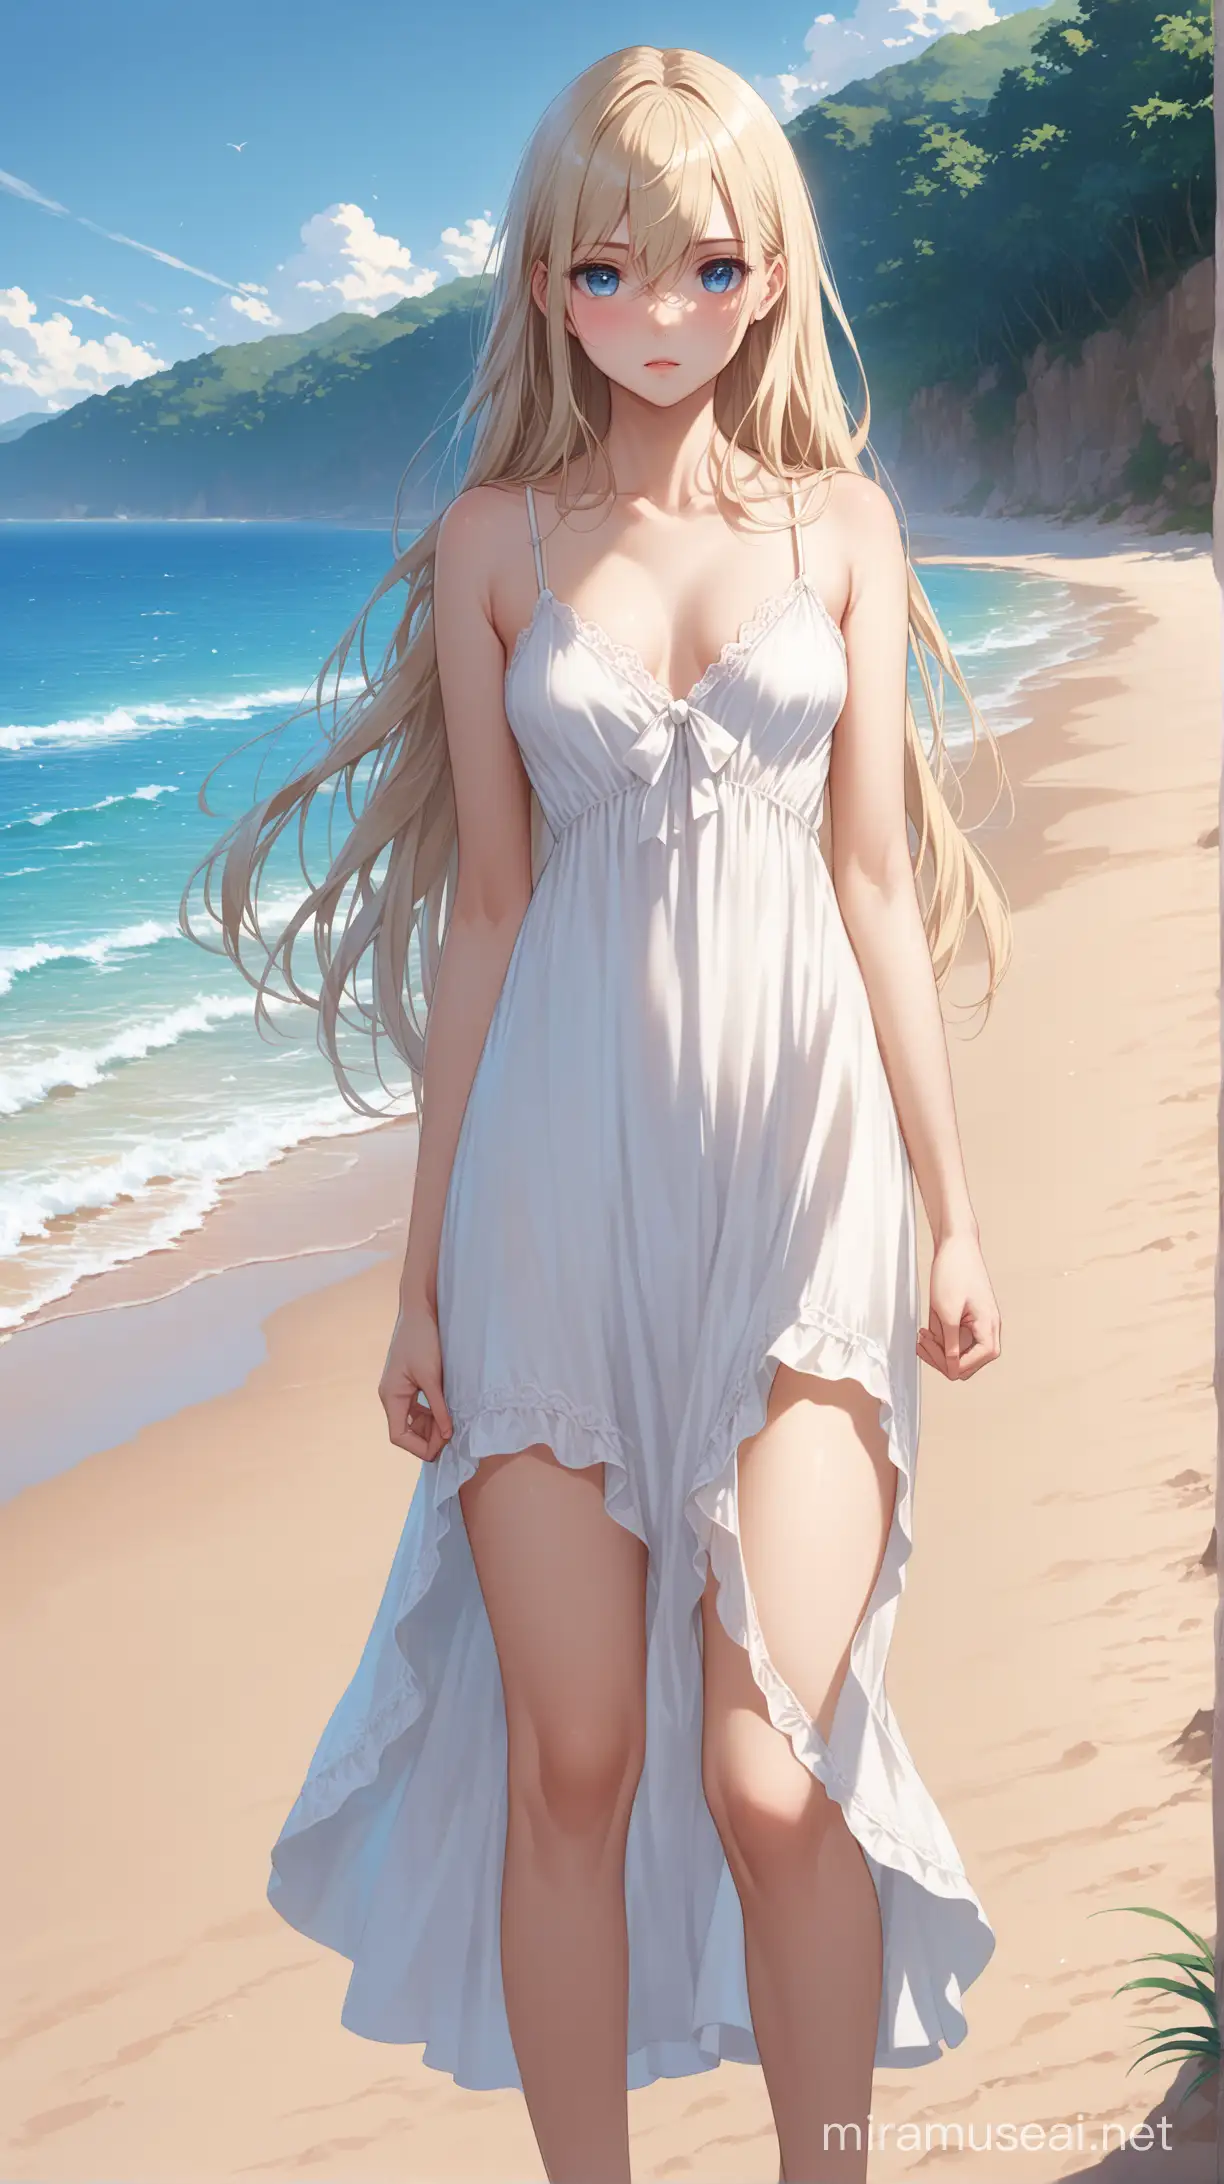 Aesthetic ((Kei Shirogane)), ((1girl)), ((straight long hair down)), ((hair between eyes)), ((blonde hair)), ((blue eyes)), ((best quality)), ((high quality)), ((high detailed eyes)), ((summer)), ((bare shoulders)), ((beach)), ((bare feet)), ((standing)), (long white dress with thin straps), (long legs) wide irises, ((cold expression)), ((medium close-up shot)), ((light erotic)), ((petite body)), ((stoic expression)), ((looking at viewer)), ((masterpiece)), ((perfect face)), ((cold expression)), ((16k)), ((hd)), ((high resolution)), ((best quality)), ((cute)), ((adorable)), (single), ((full body)), ((symmetrical face)), ((single)), ((detailed hands)), ((thighs)), ((emotionless)), ((slender body)), ((ultra detailed hair)), ((high details)), ((outdoors))